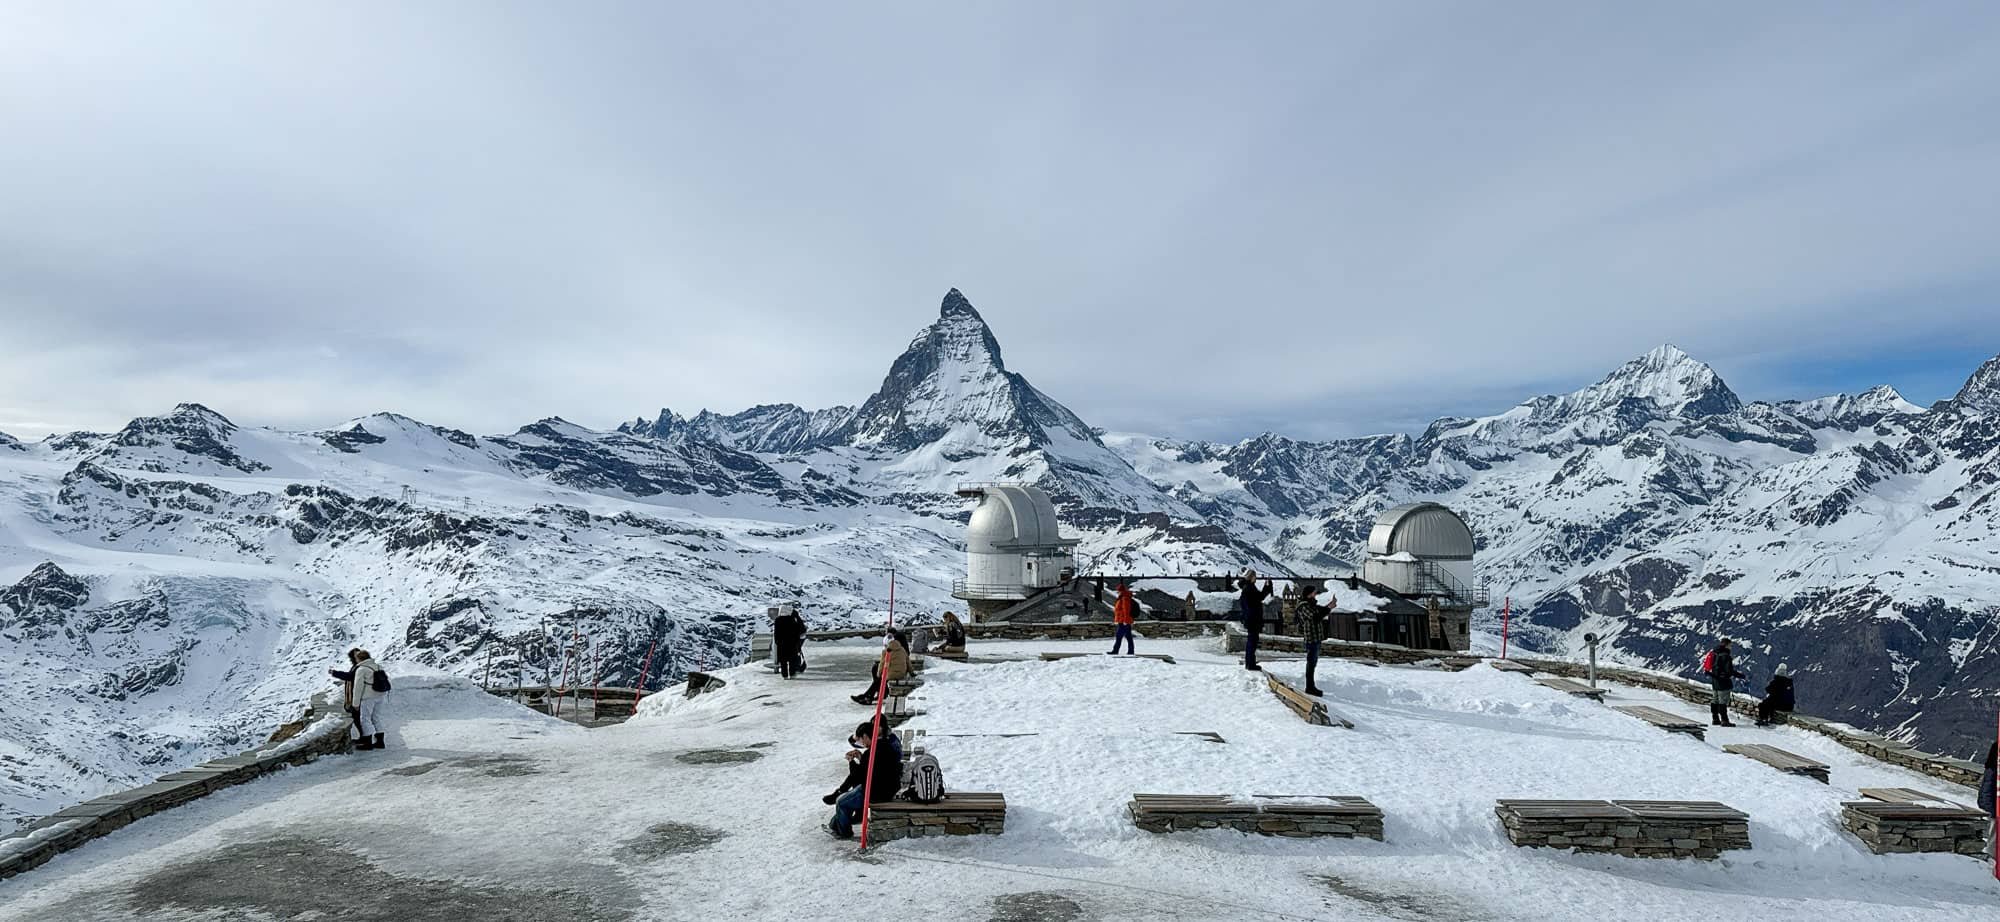 The view of the Matterhorn from the top of Gornergrat